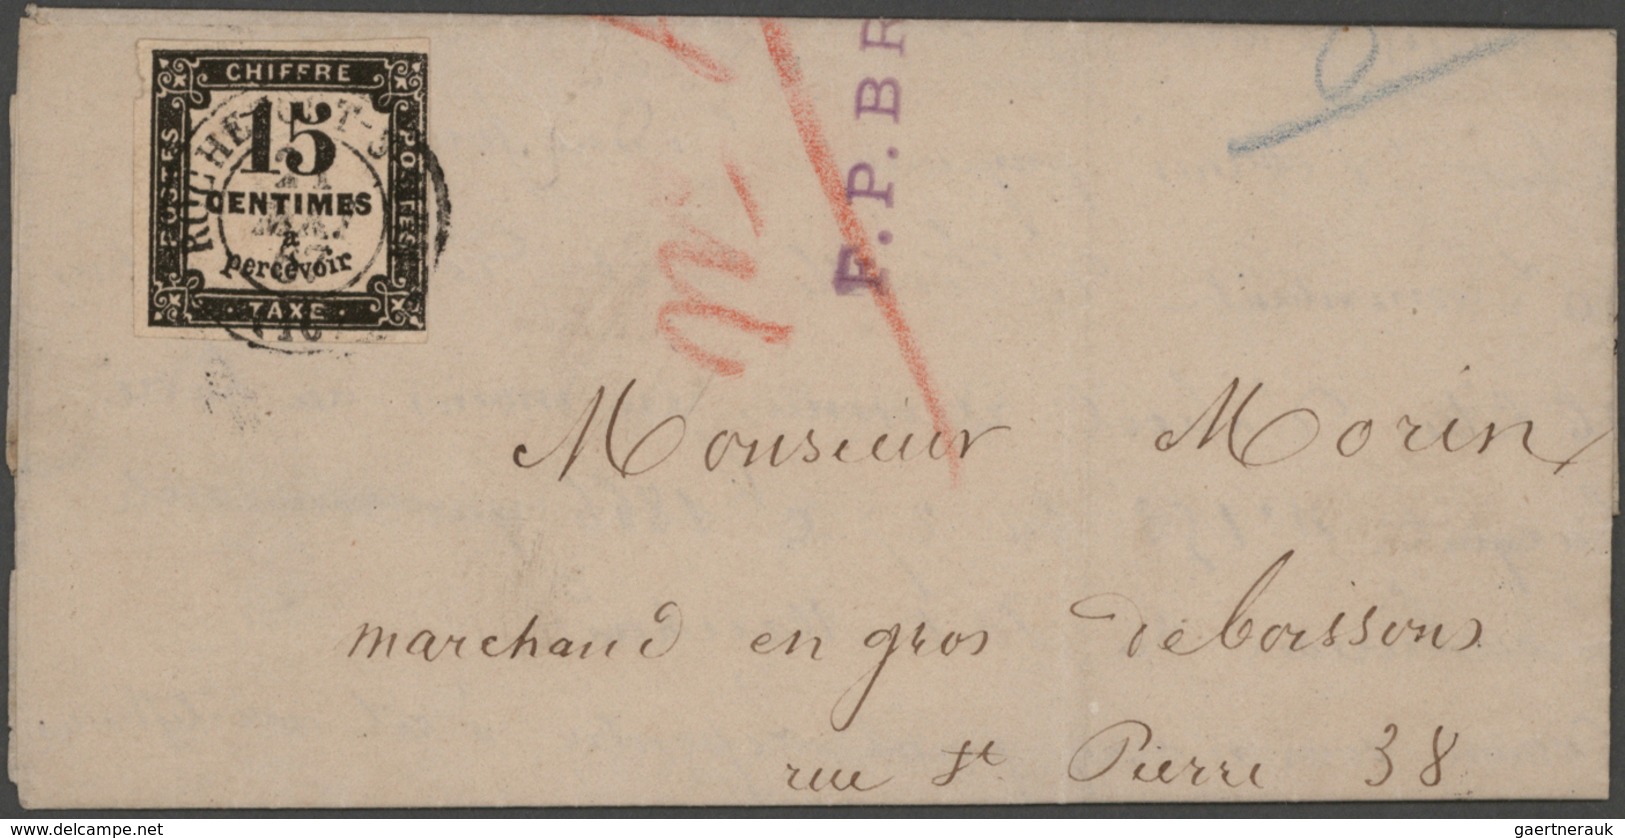 Frankreich: 1830/1980 (ca.), holding of apprx. 244 covers/cards from pre-philately/classic period, s